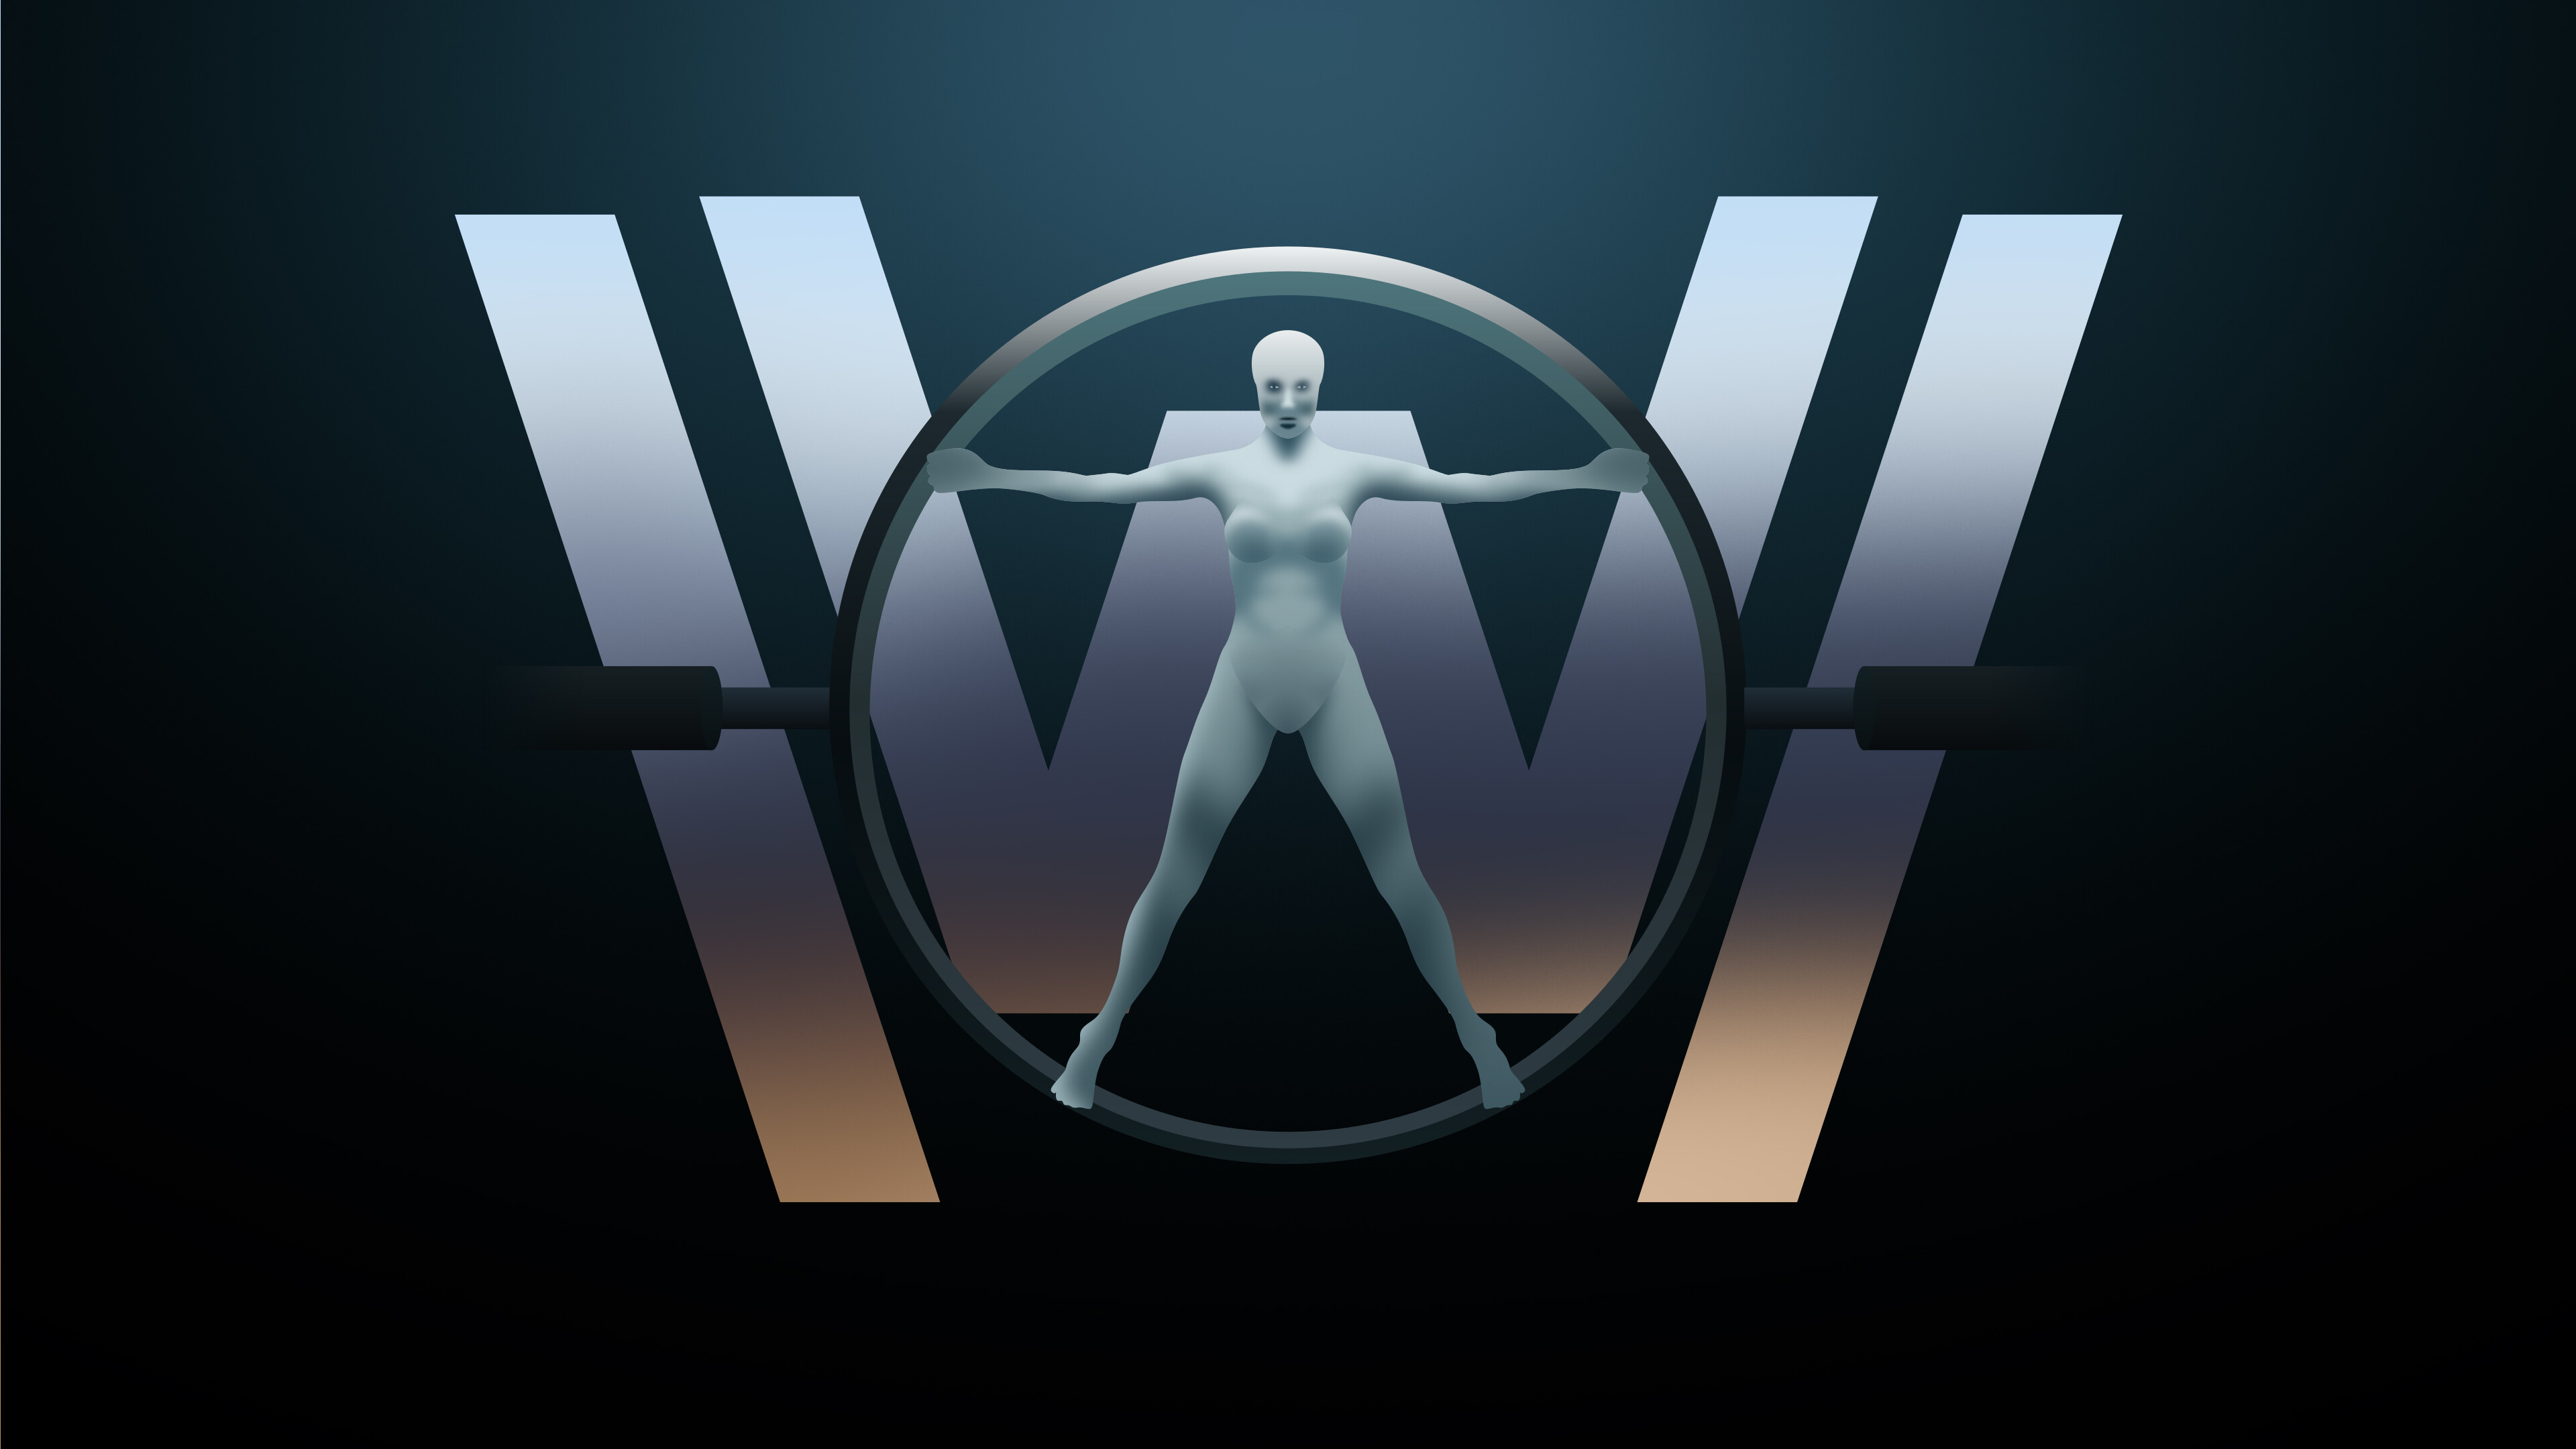 Westworld: An American dystopian science fiction western television series. 3840x2160 4K Background.